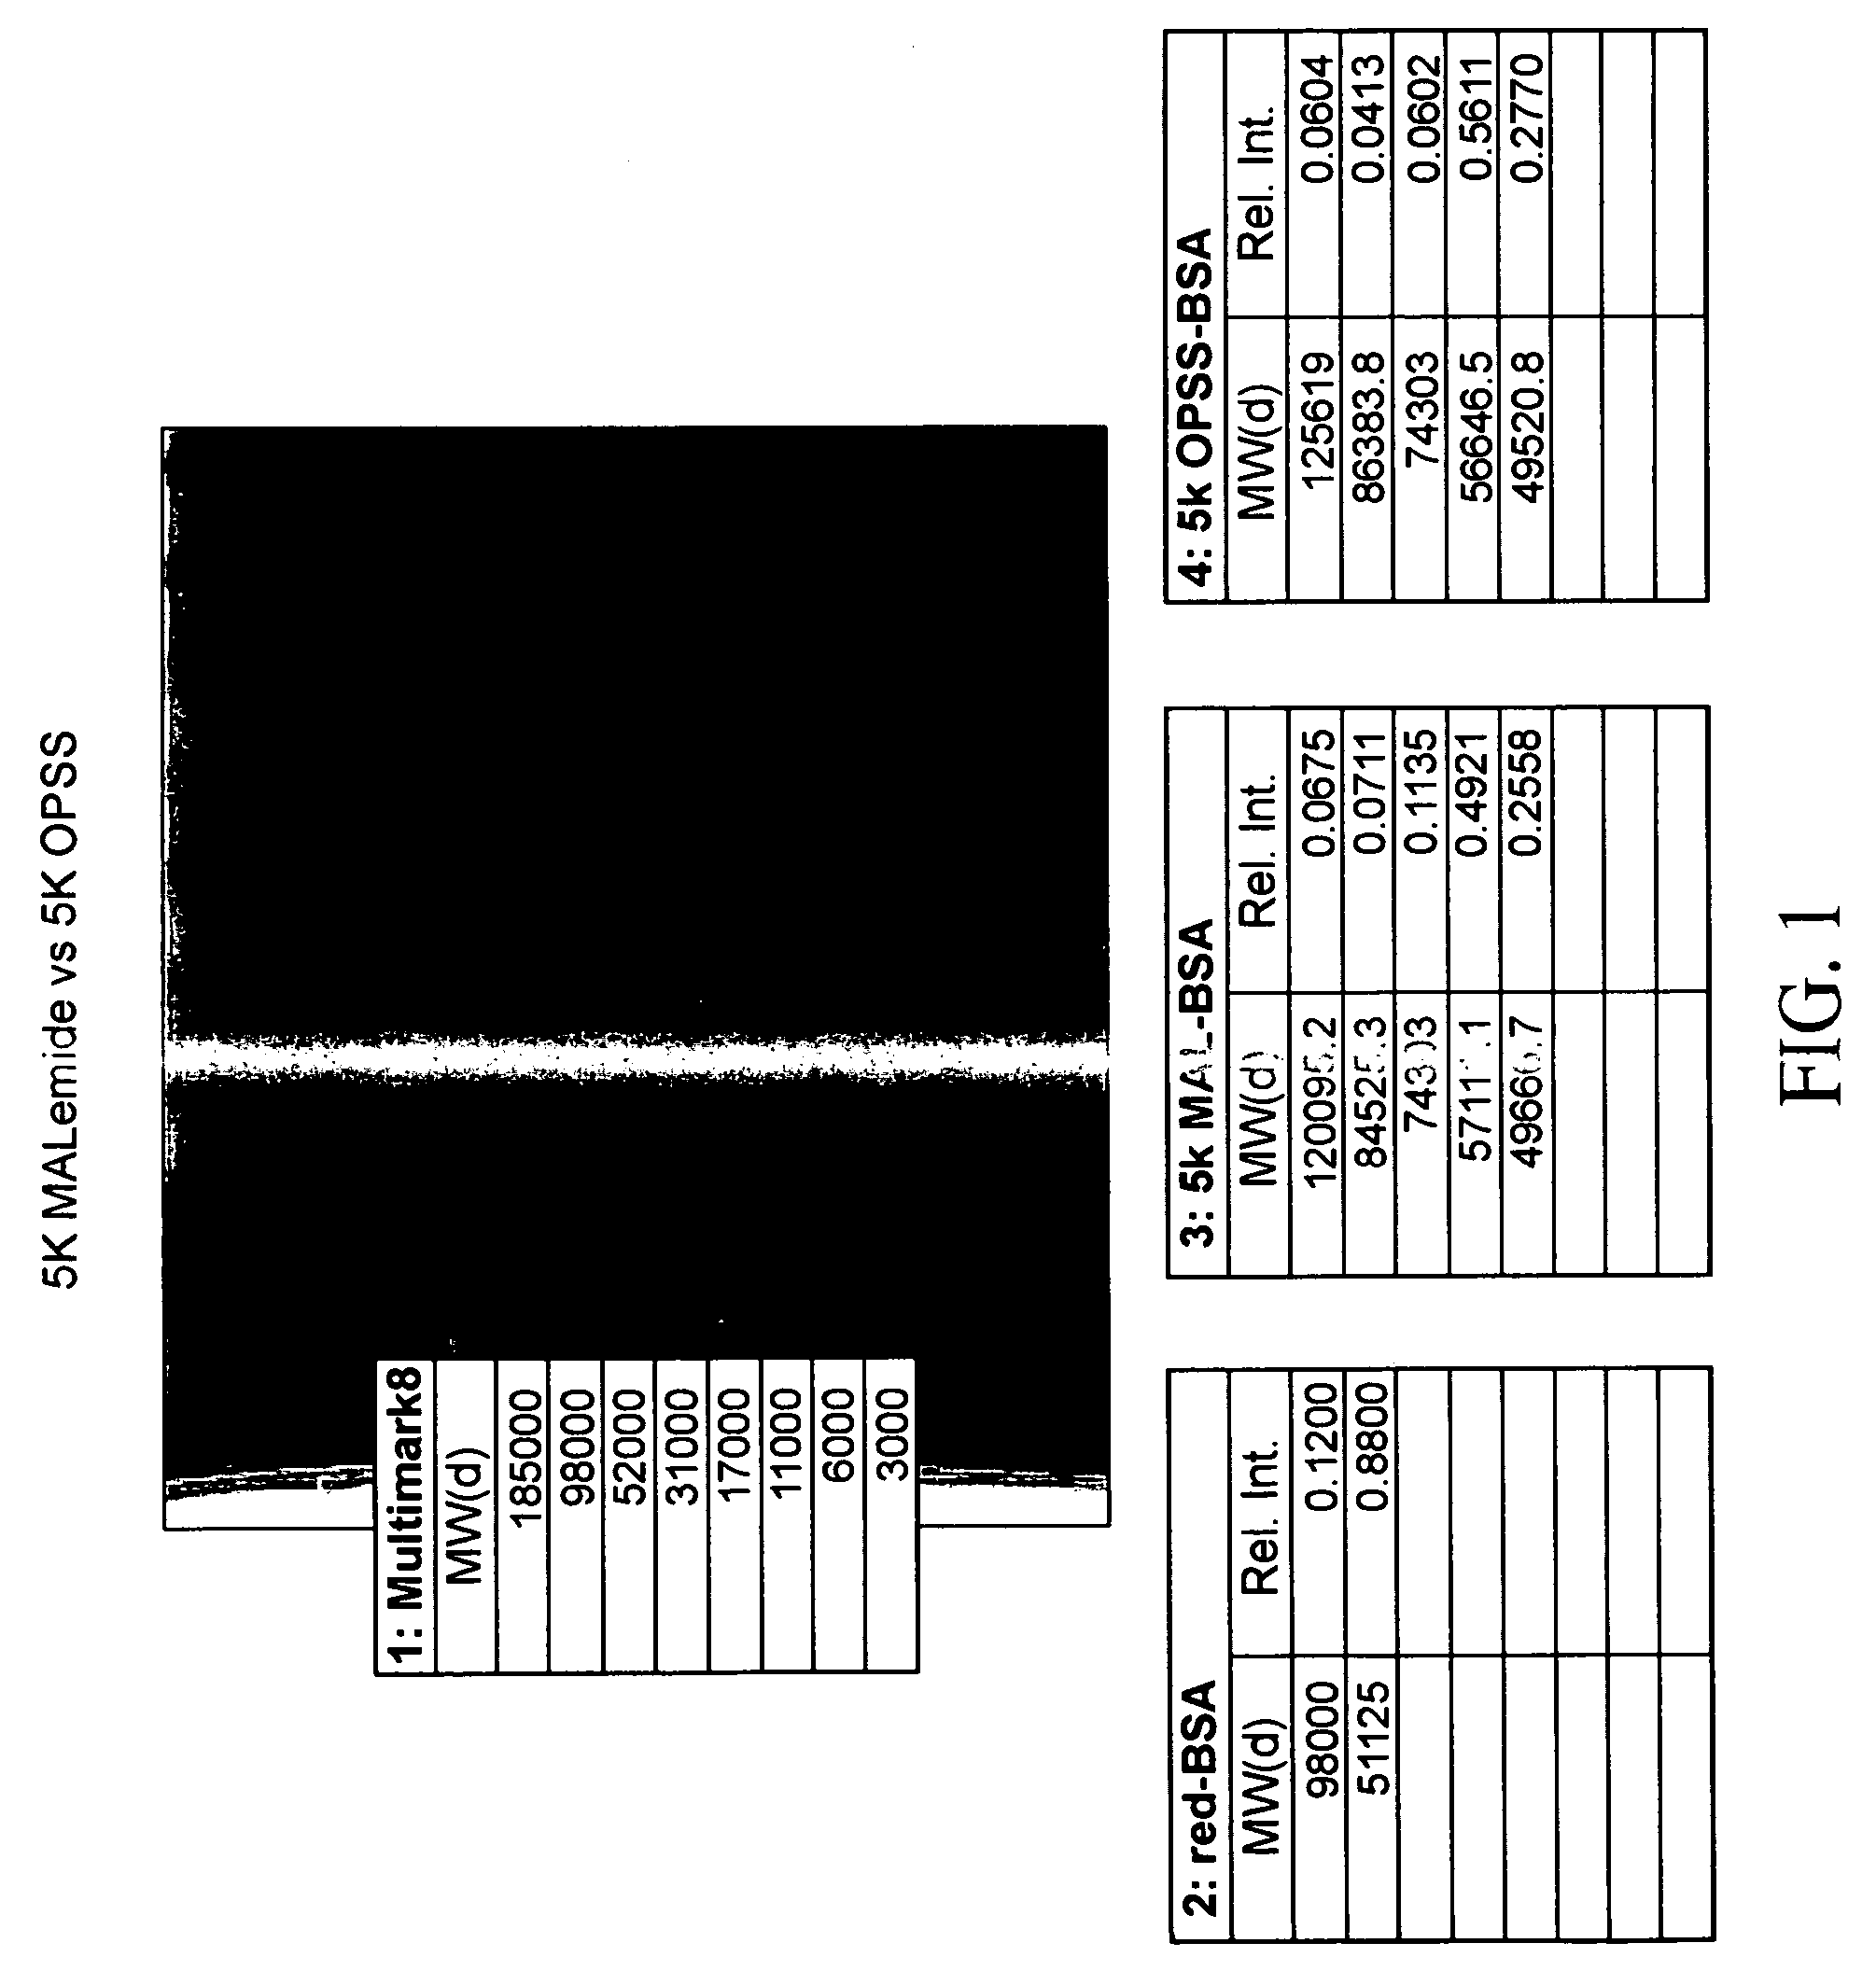 Stabilized polymeric thiol reagents